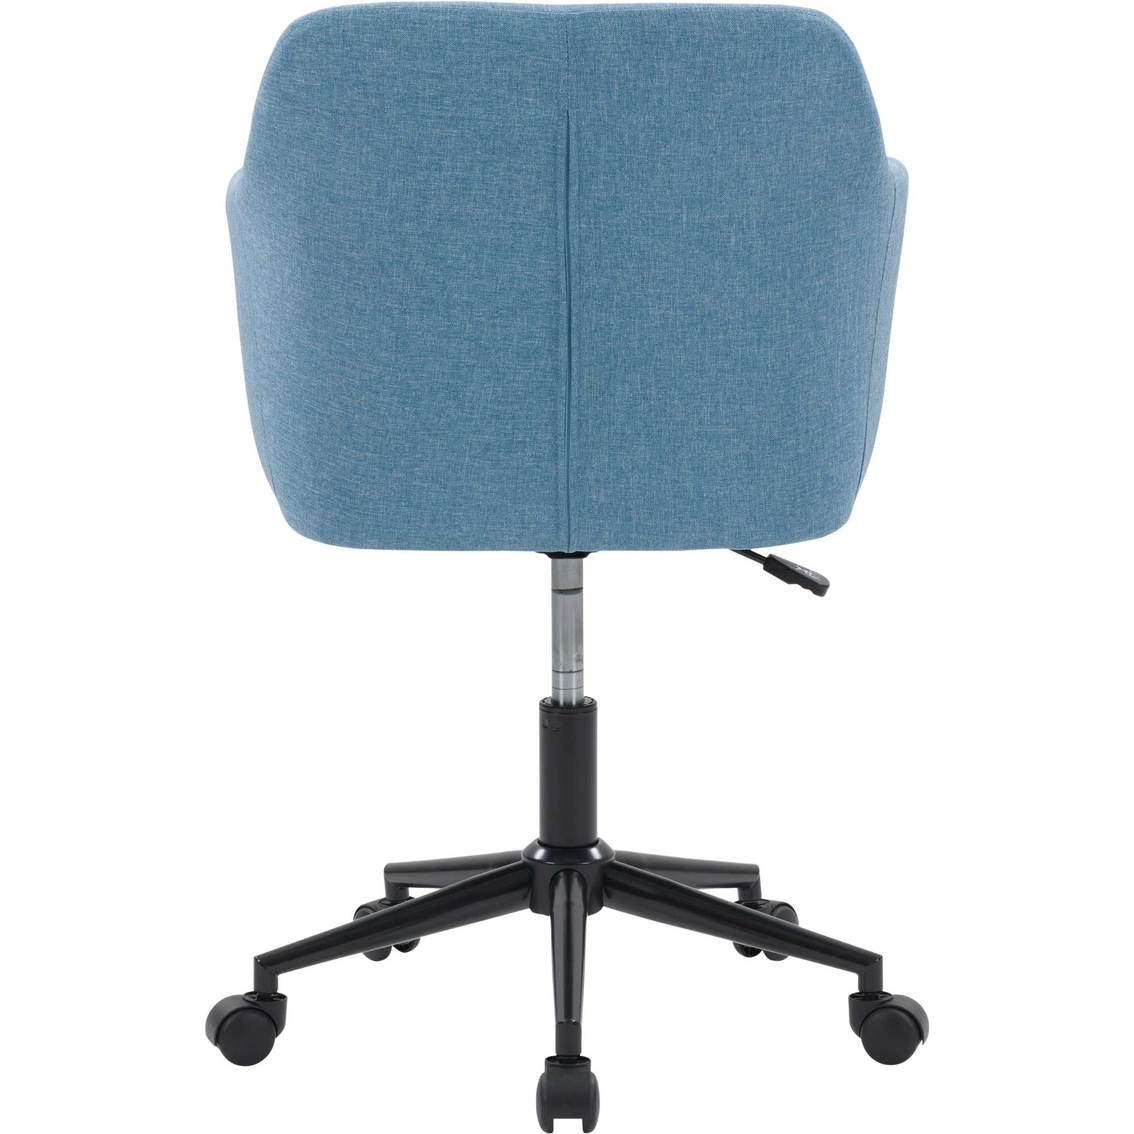 CorLiving Marlowe Upholstered Button Tufted Task Chair - Image 3 of 9